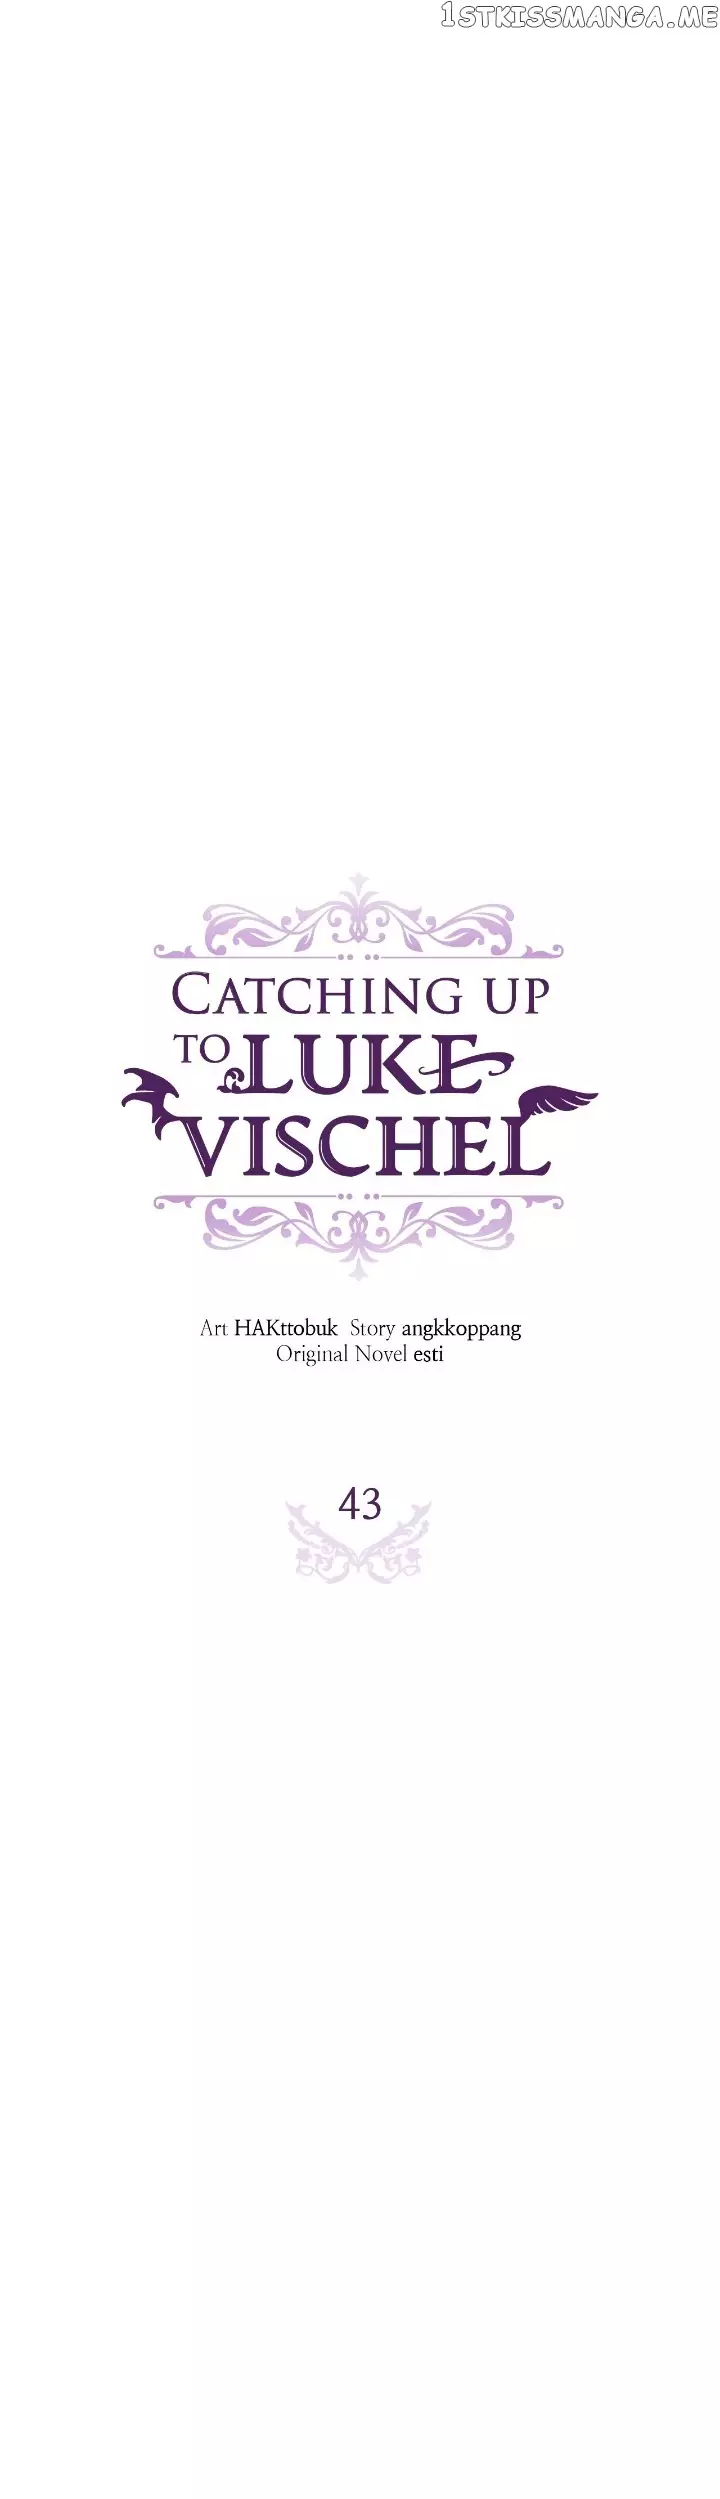 Catching Up With Luke Bischel - 43 page 19-2a37cb68